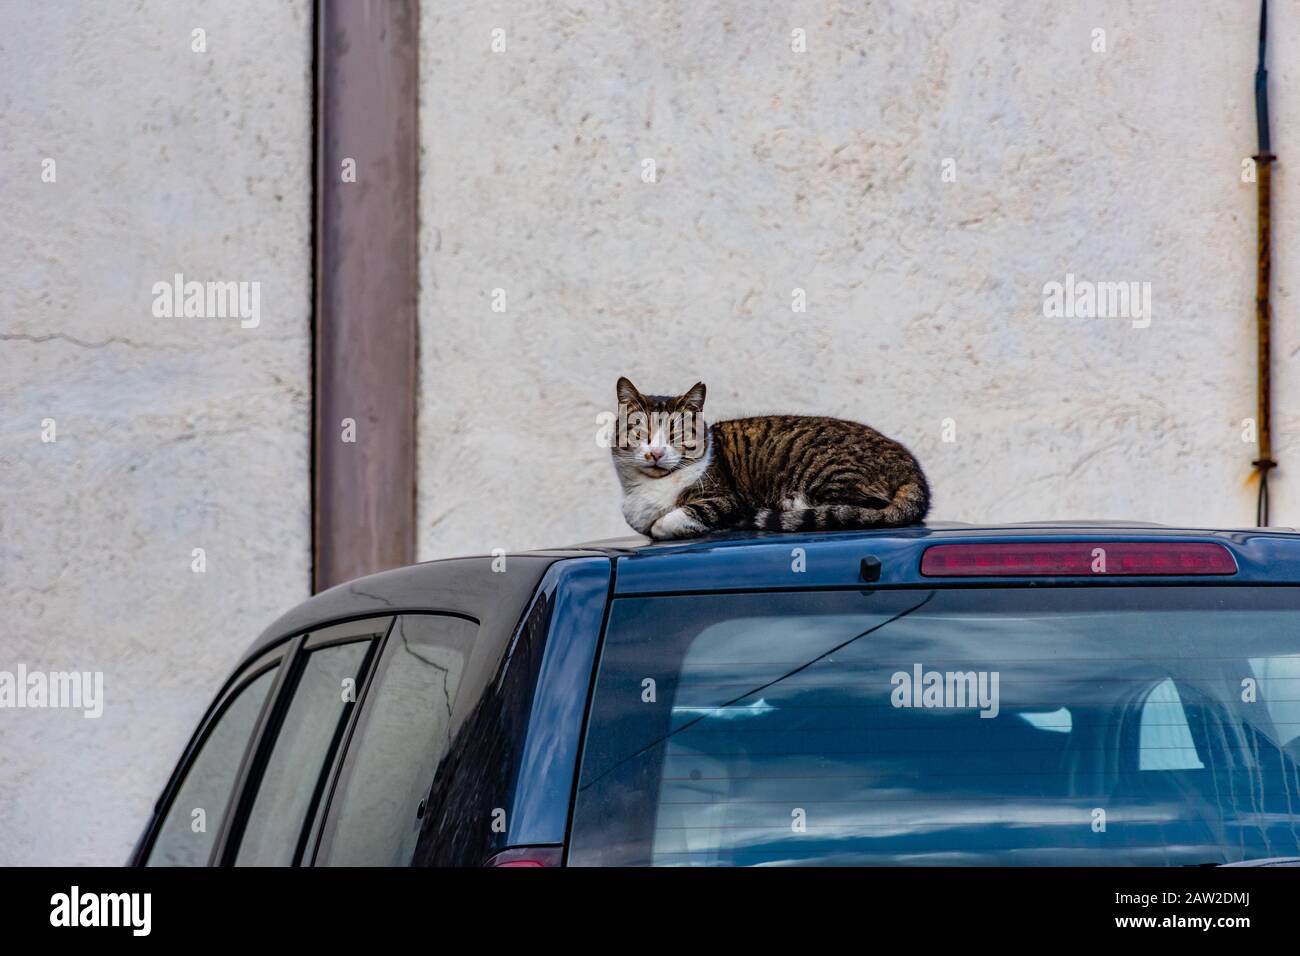 A brazen careless relaxed stray cat sitting / lying on top of a blue car Stock Photo